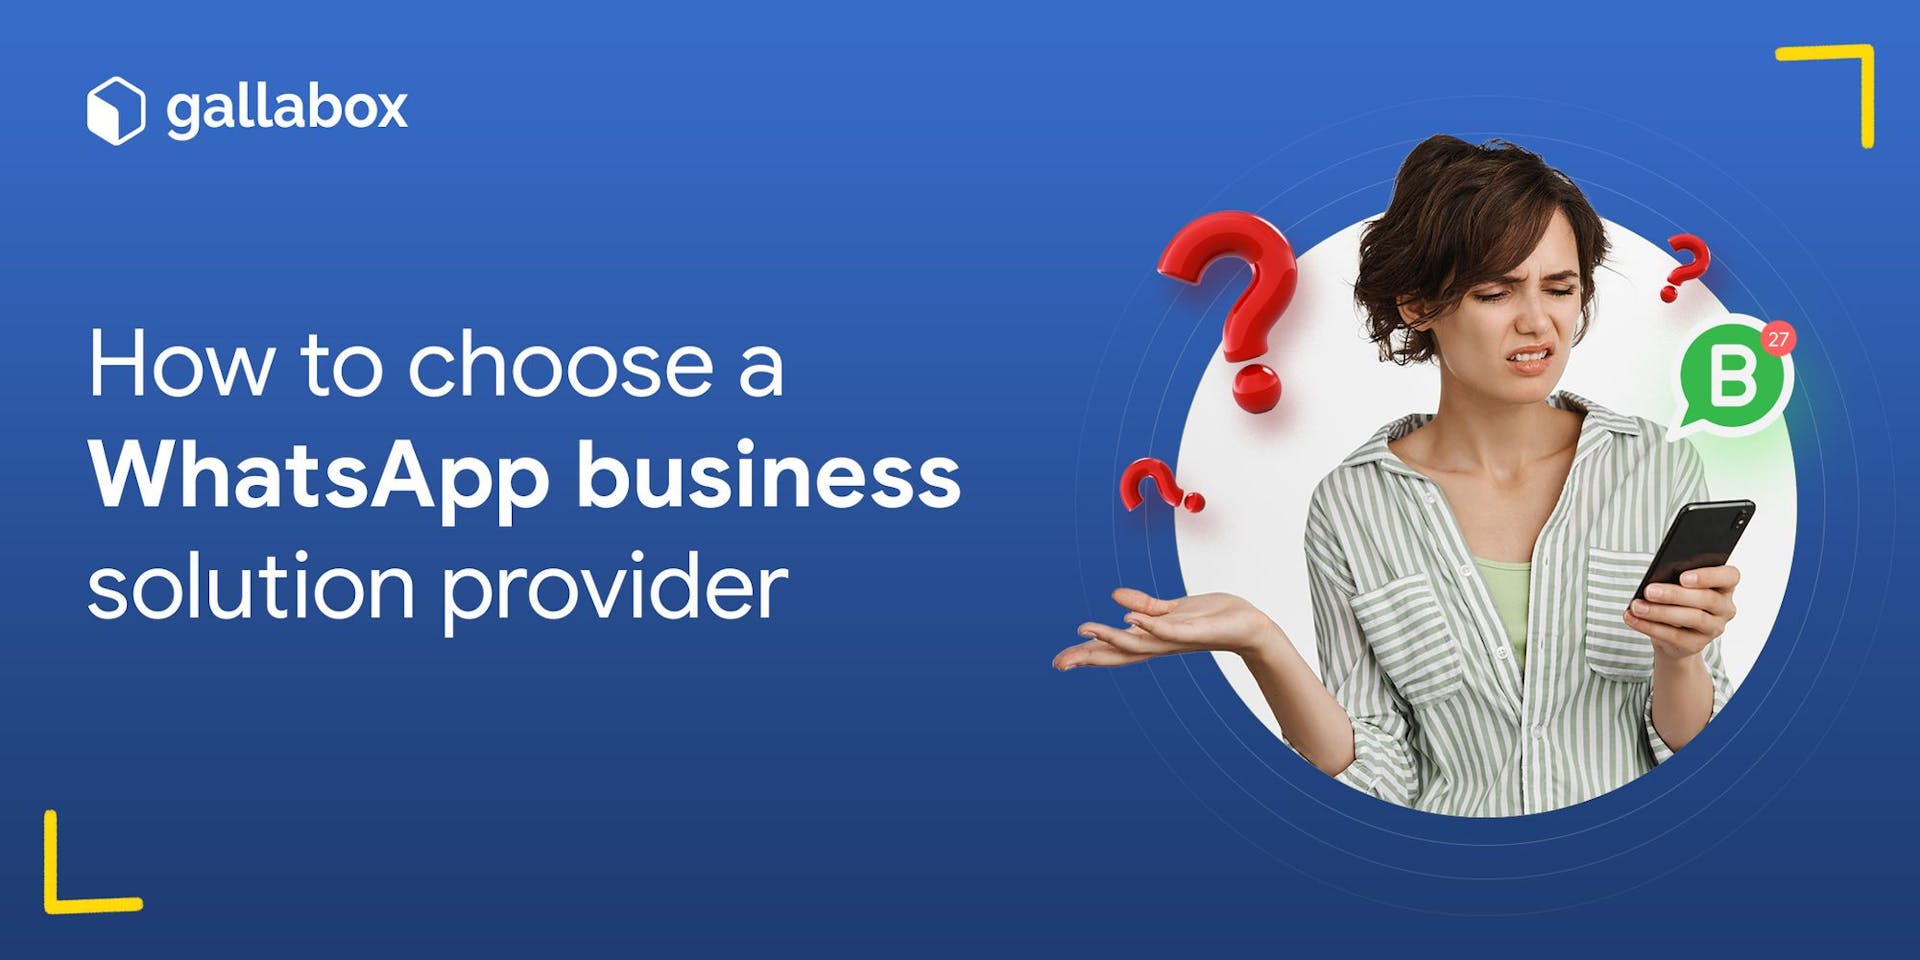 WhatsApp Partners: How to choose a WhatsApp business solution provider